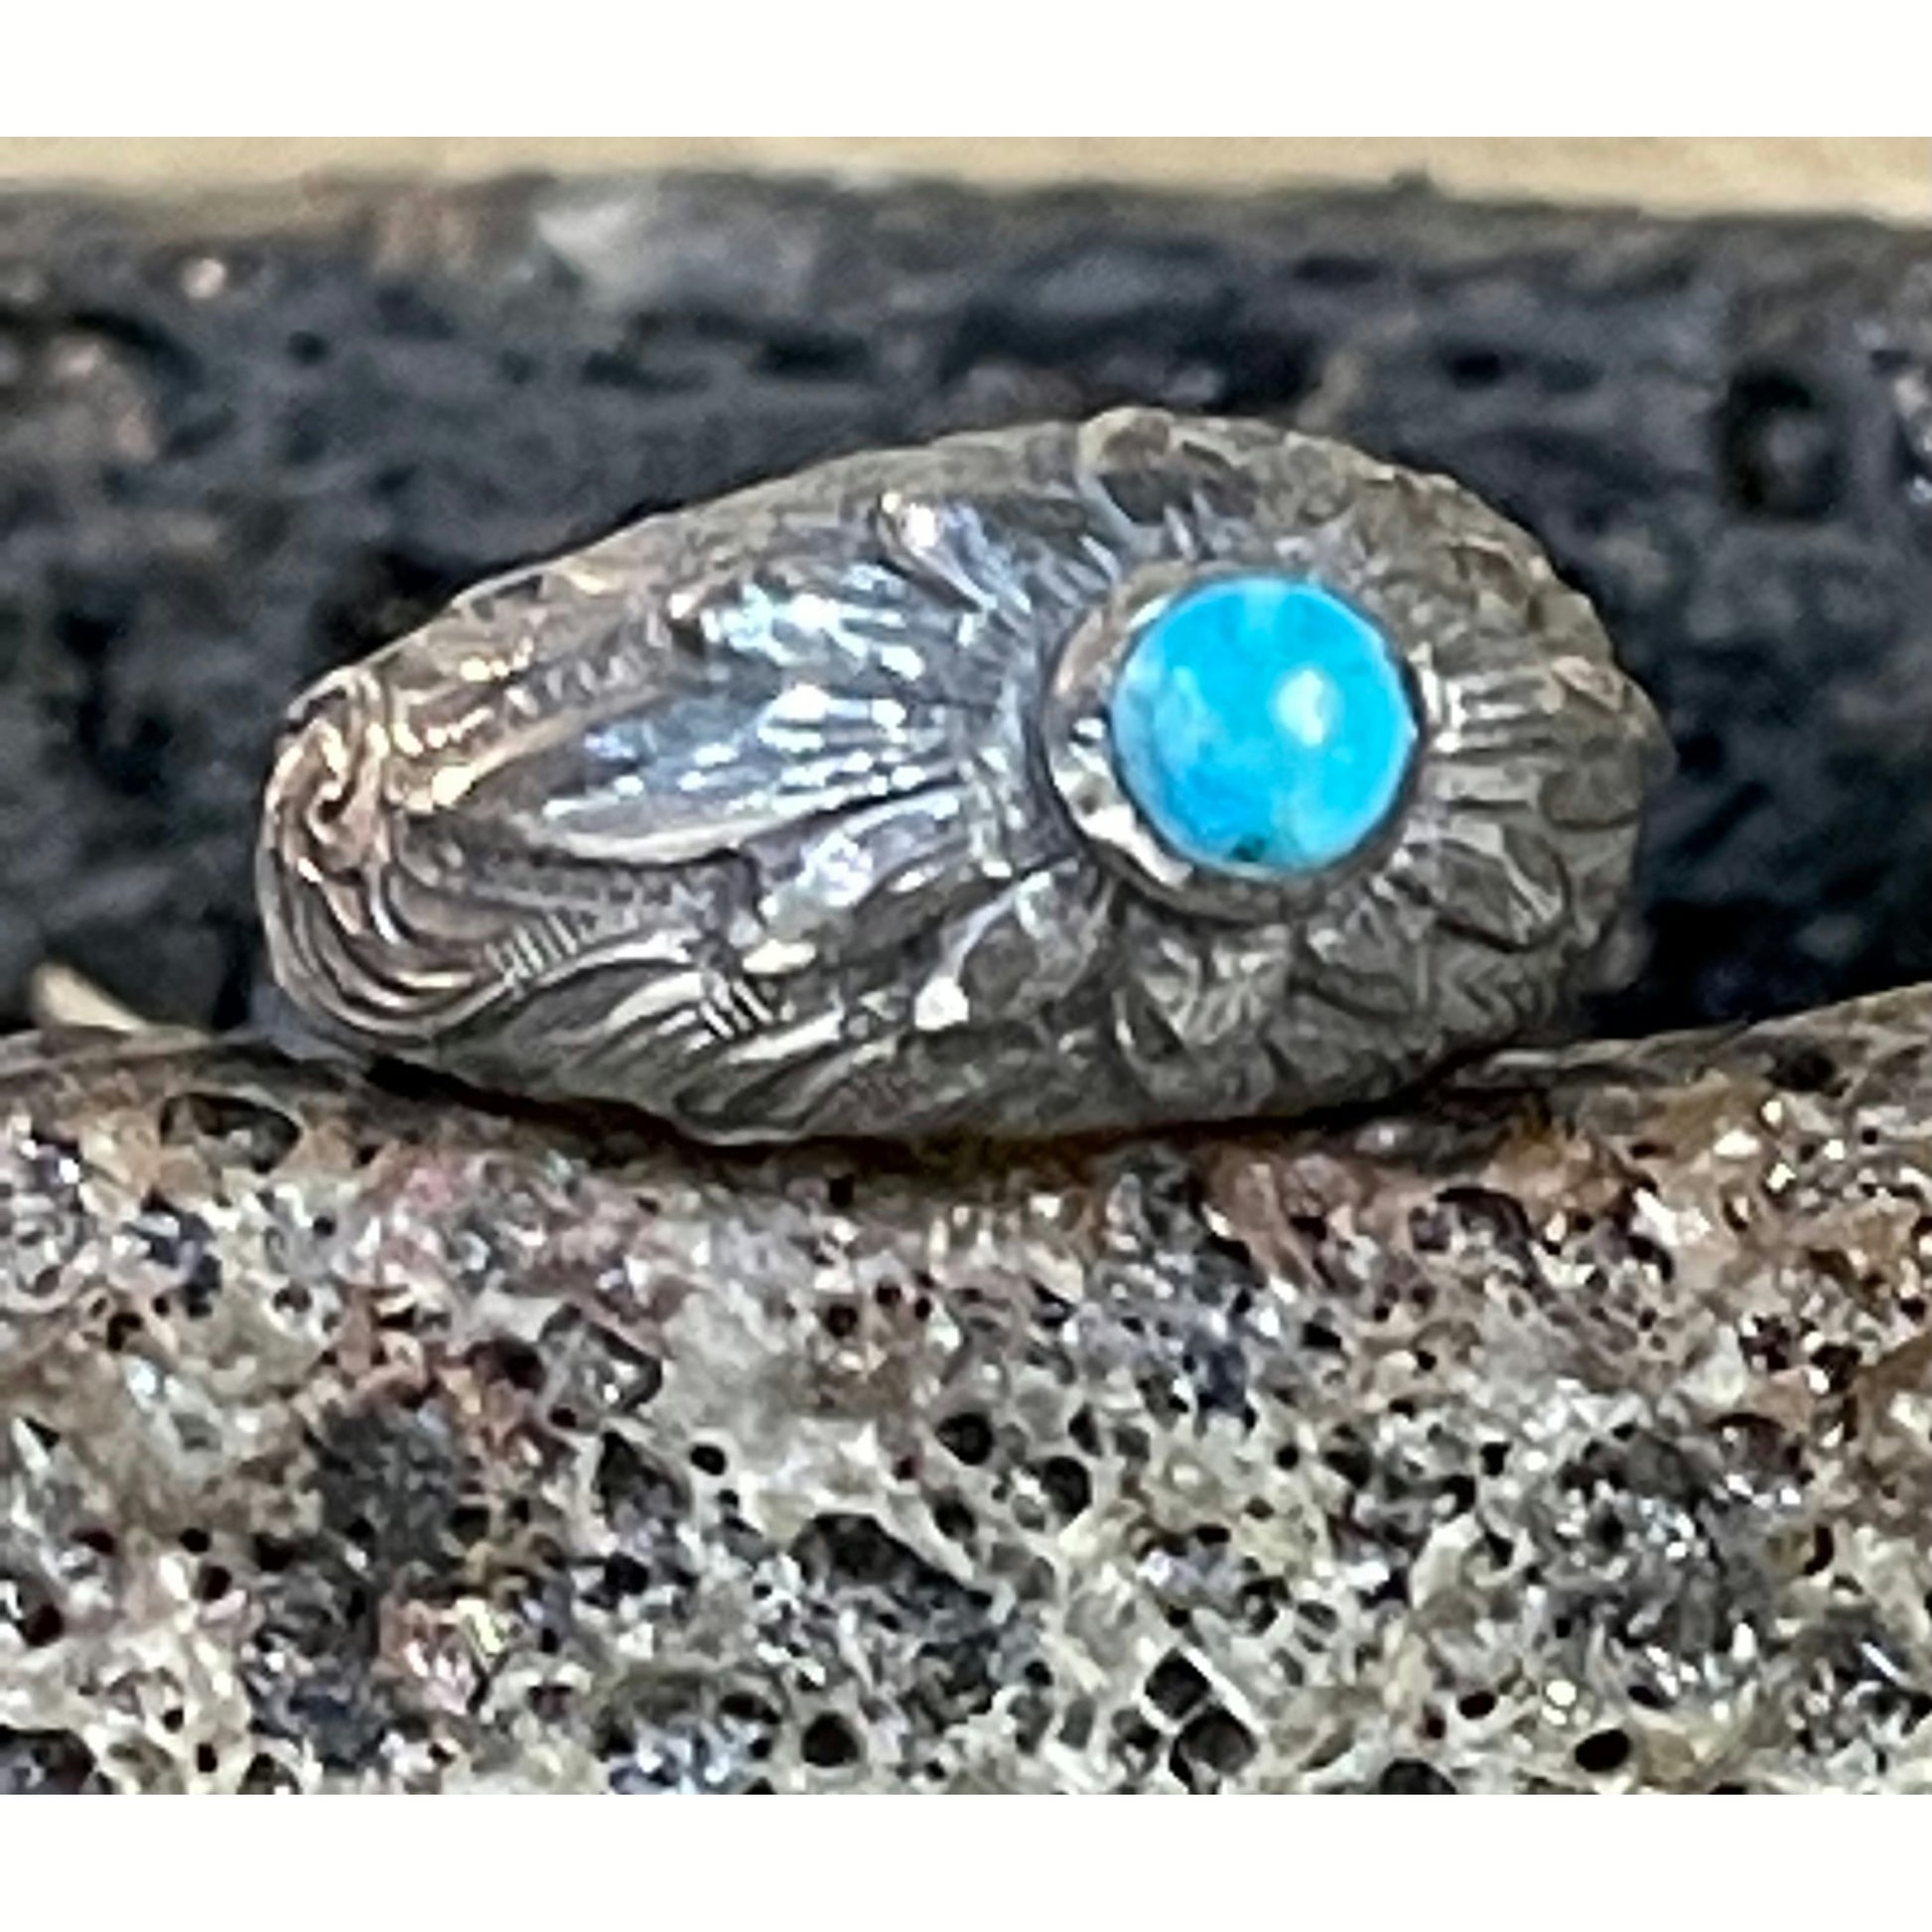 "Madre" is a handmade sterling silver ring that features a high dome with an overlaid hand engraved flower with the center of the flower being a turquoise stone! 